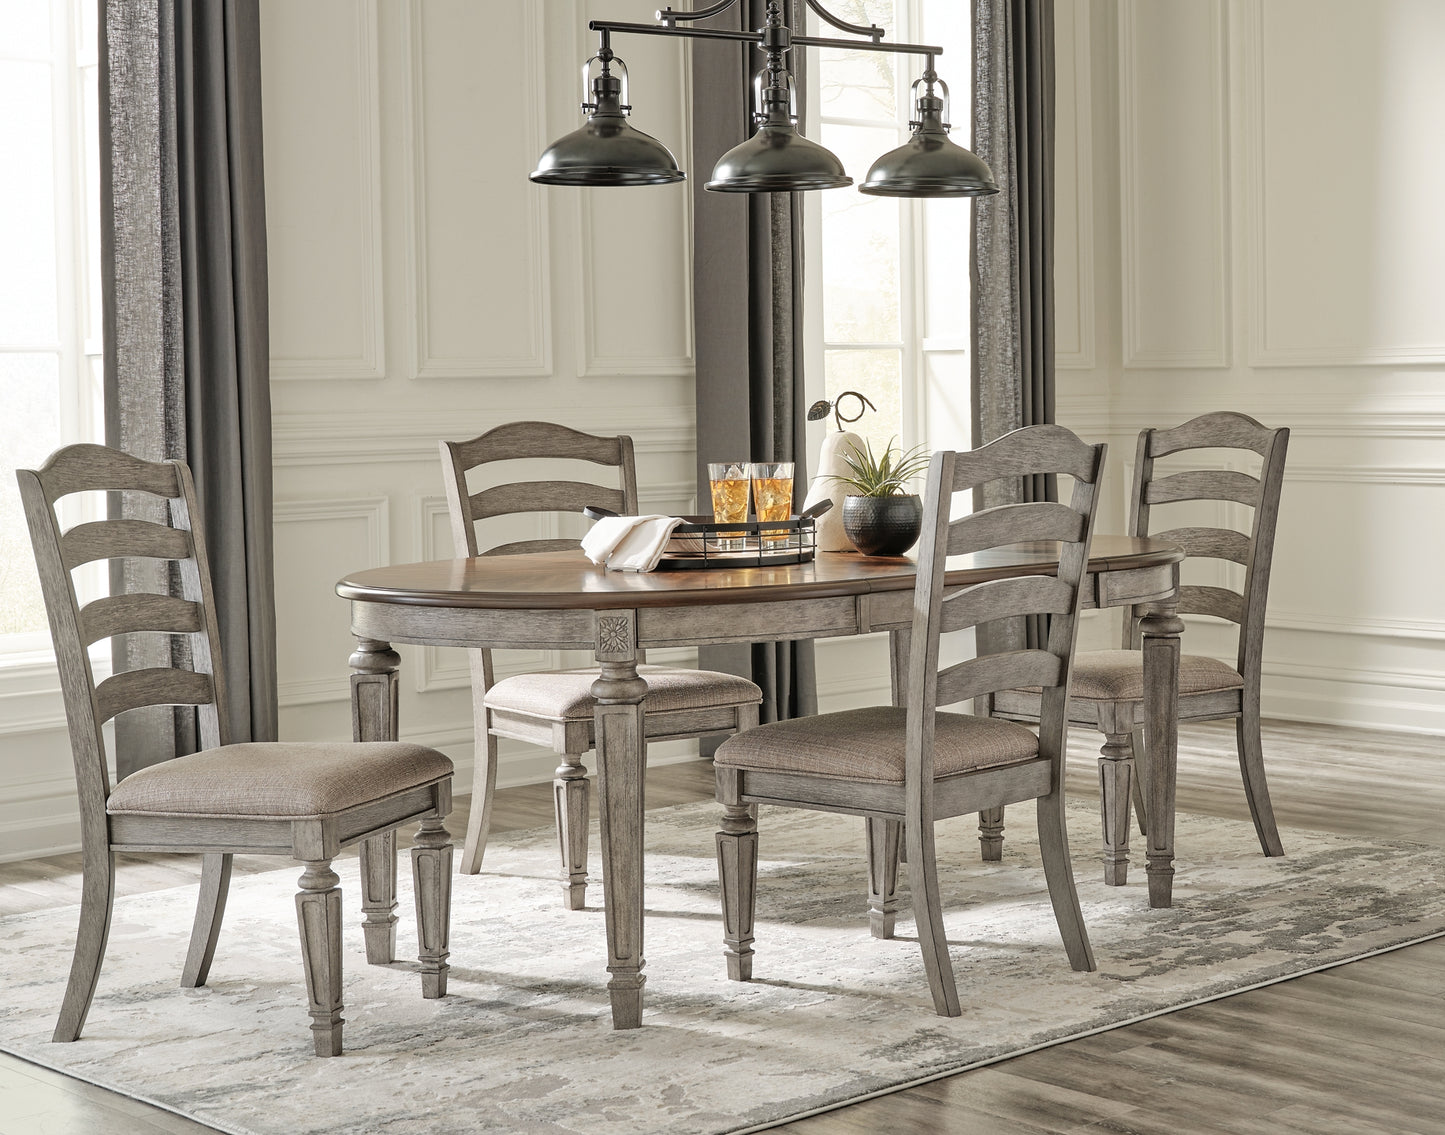 Lodenbay Dining Table and 4 Chairs Signature Design by Ashley®